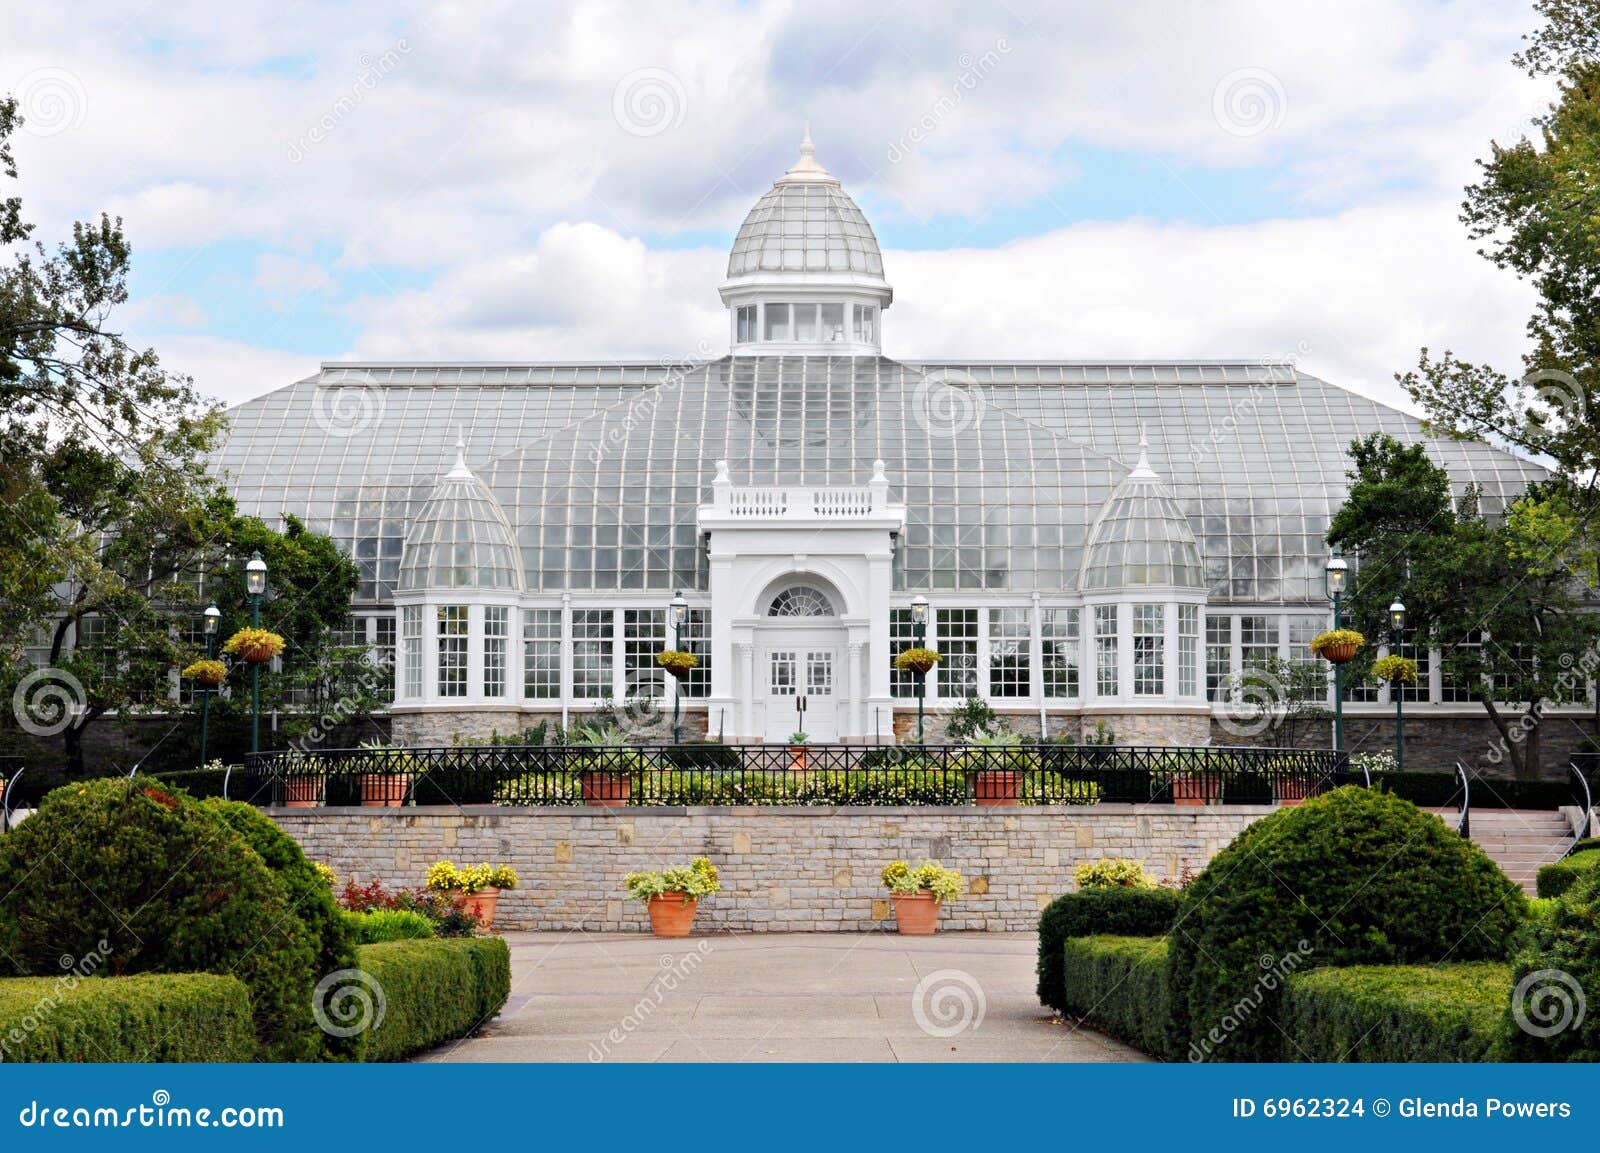 Glass Mansion Conservatory Stock Photo Image Of Outdoors 6962324